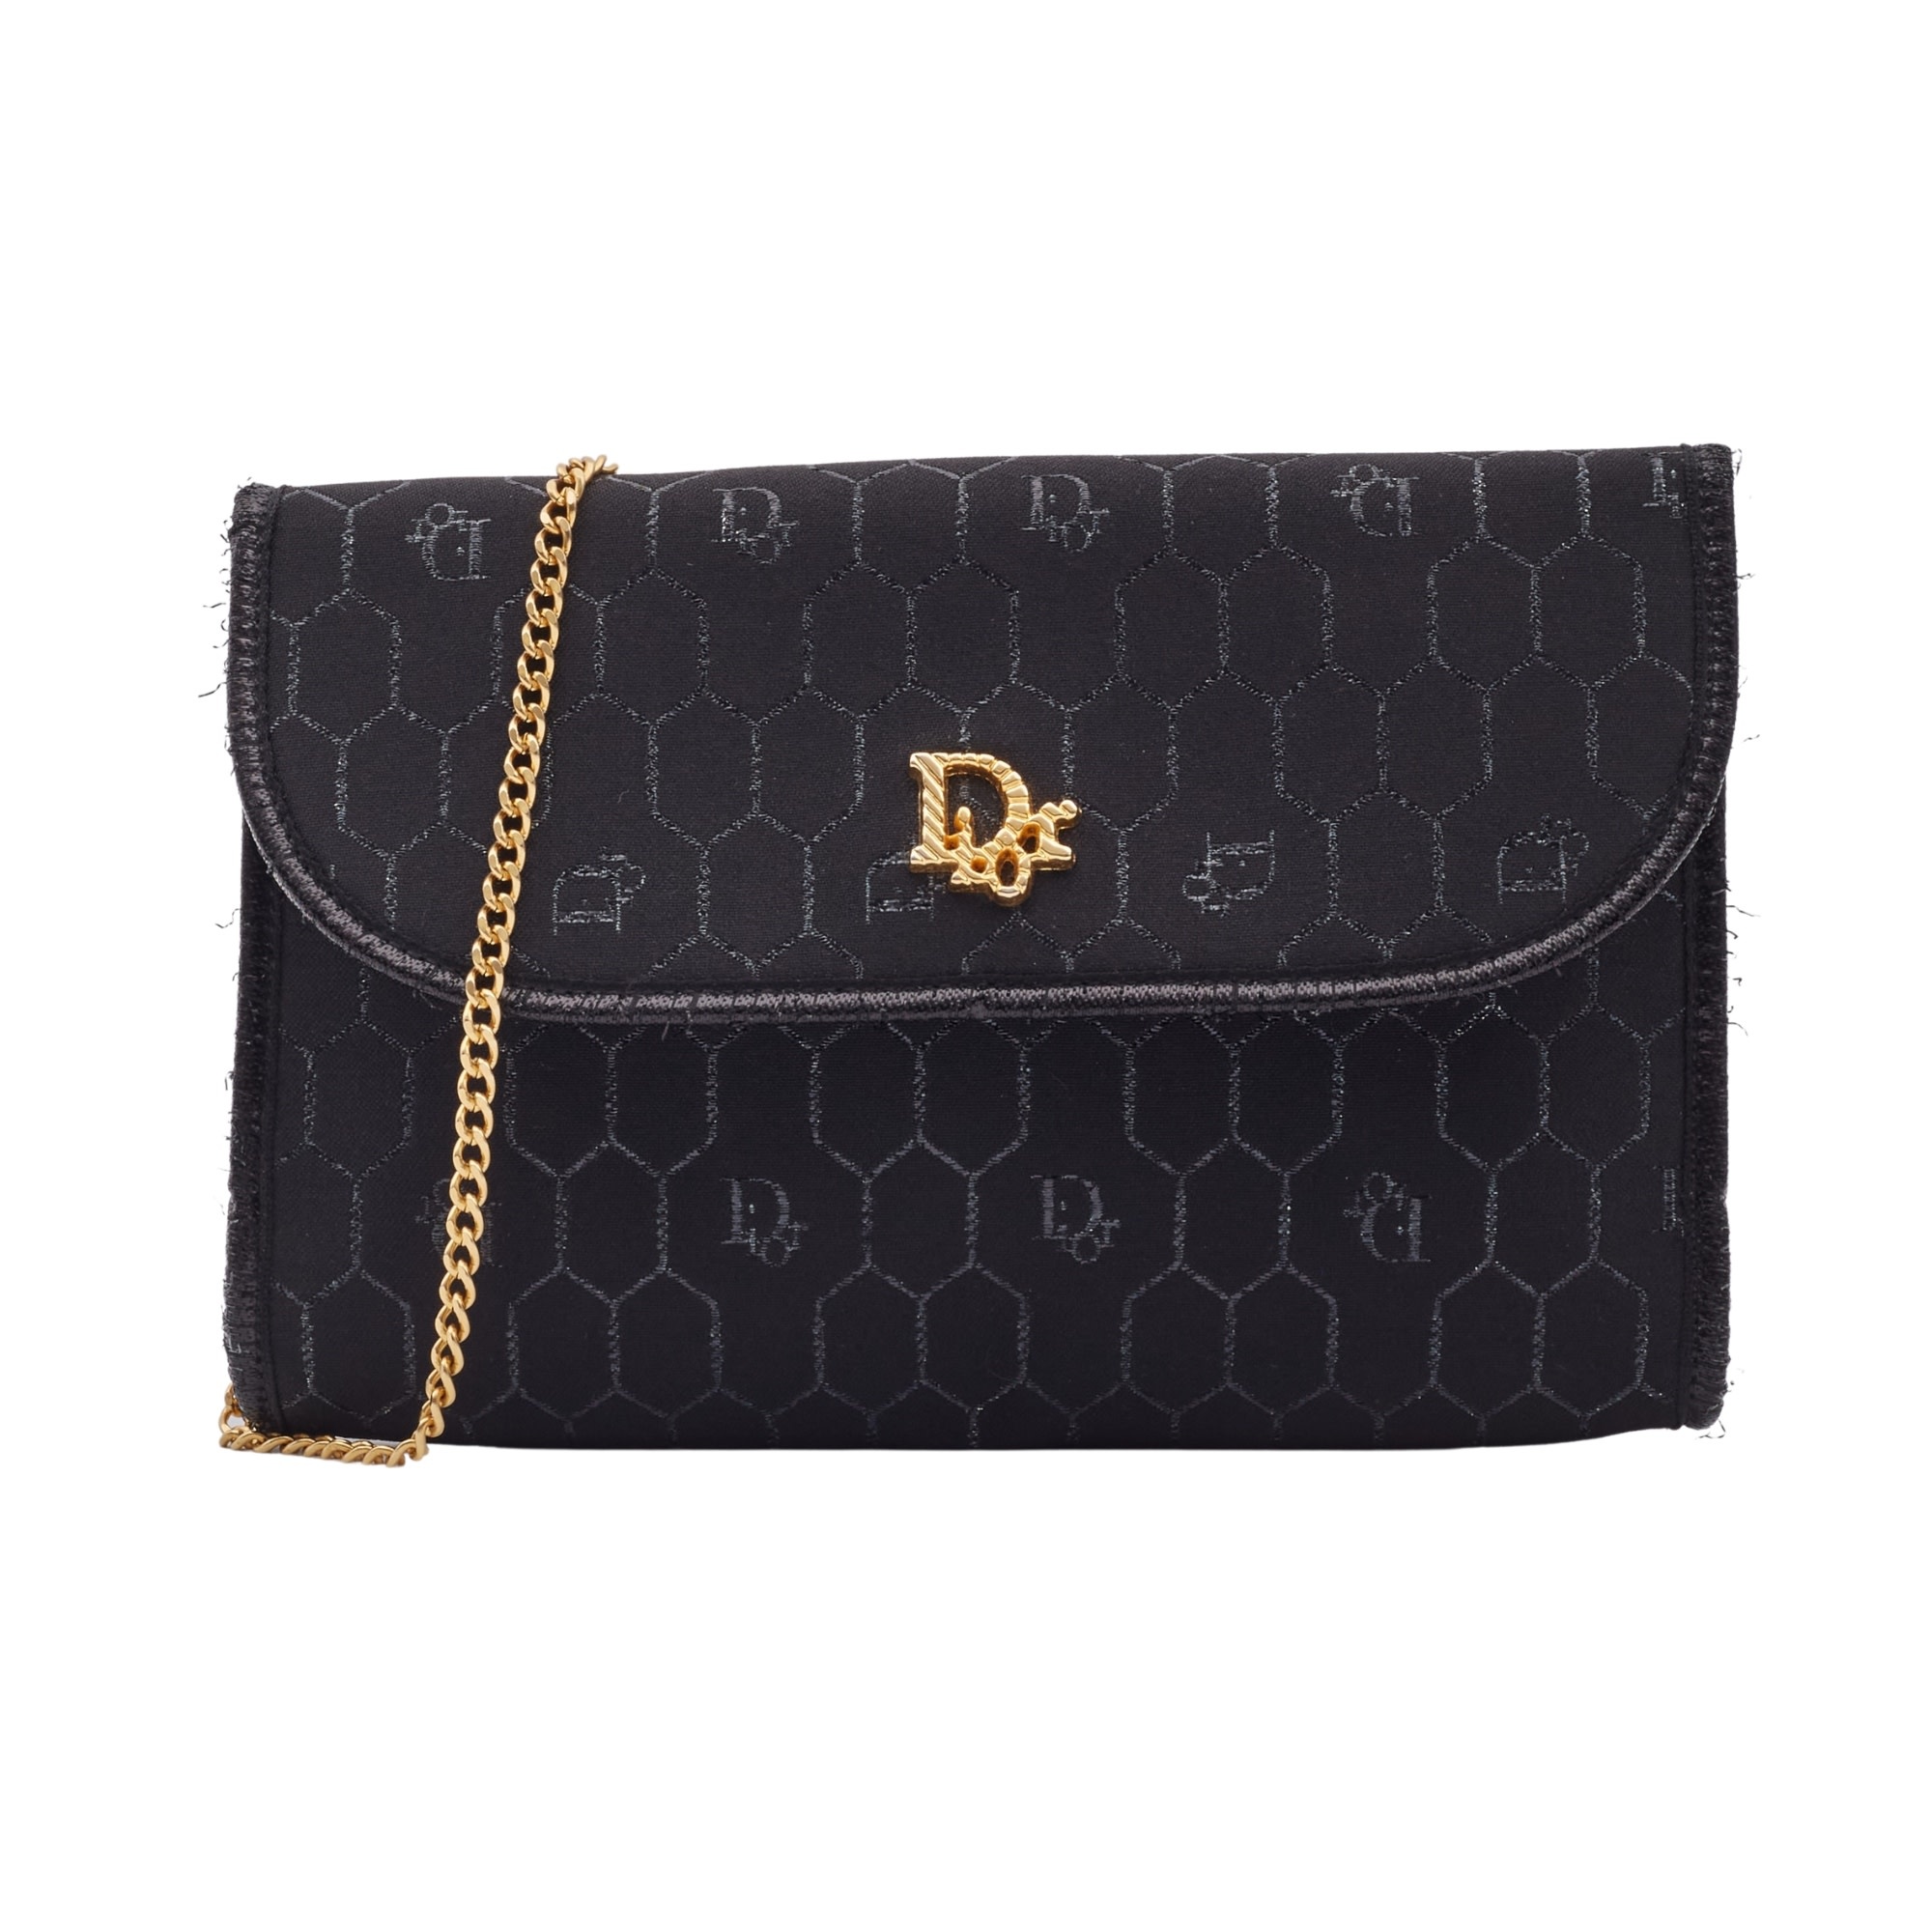 DIOR VINTAGE HONEYCOMB MONOGRAM CROSSBODY CLUTCH BAG DEAL OF THE DAY